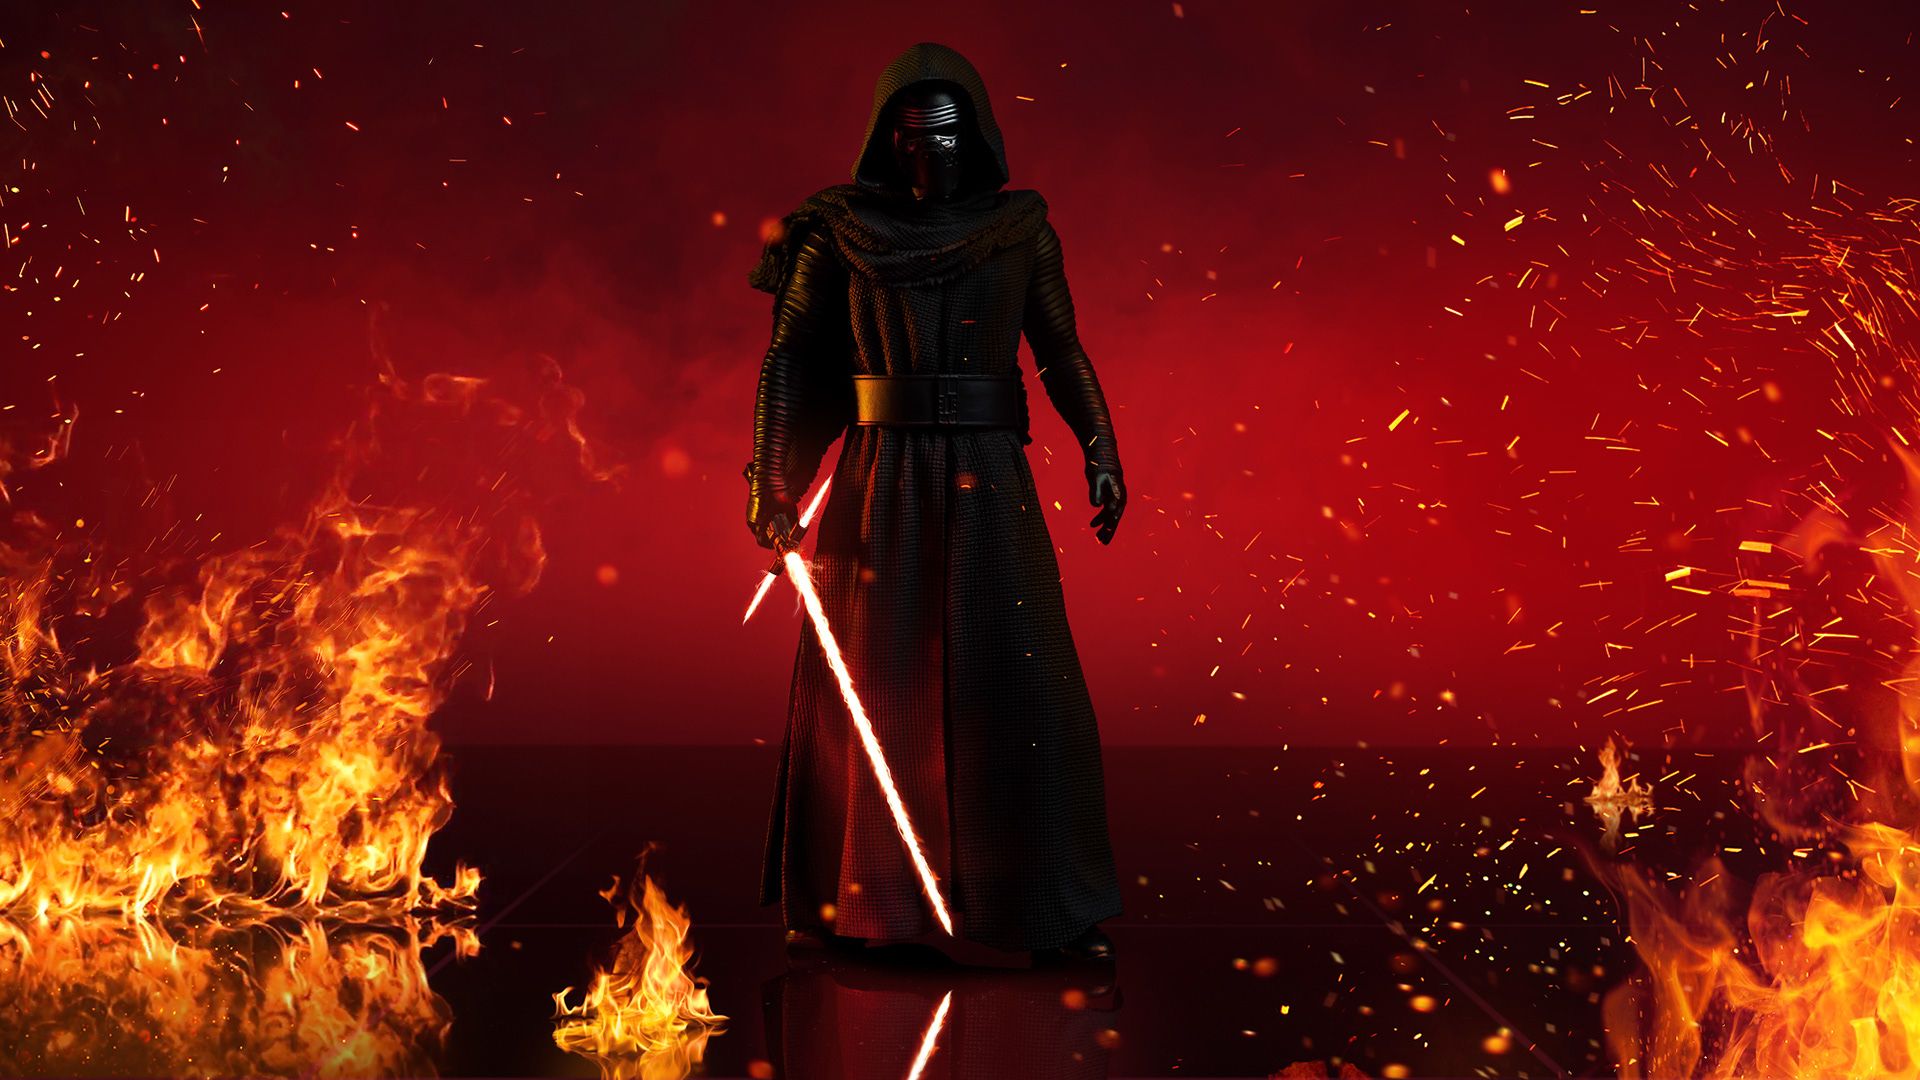 Kylo Ren With Lightsaber In Star Wars 1080x2340 Resolution Wallpaper, HD Movies 4K Wallpaper, Image, Photo and Background